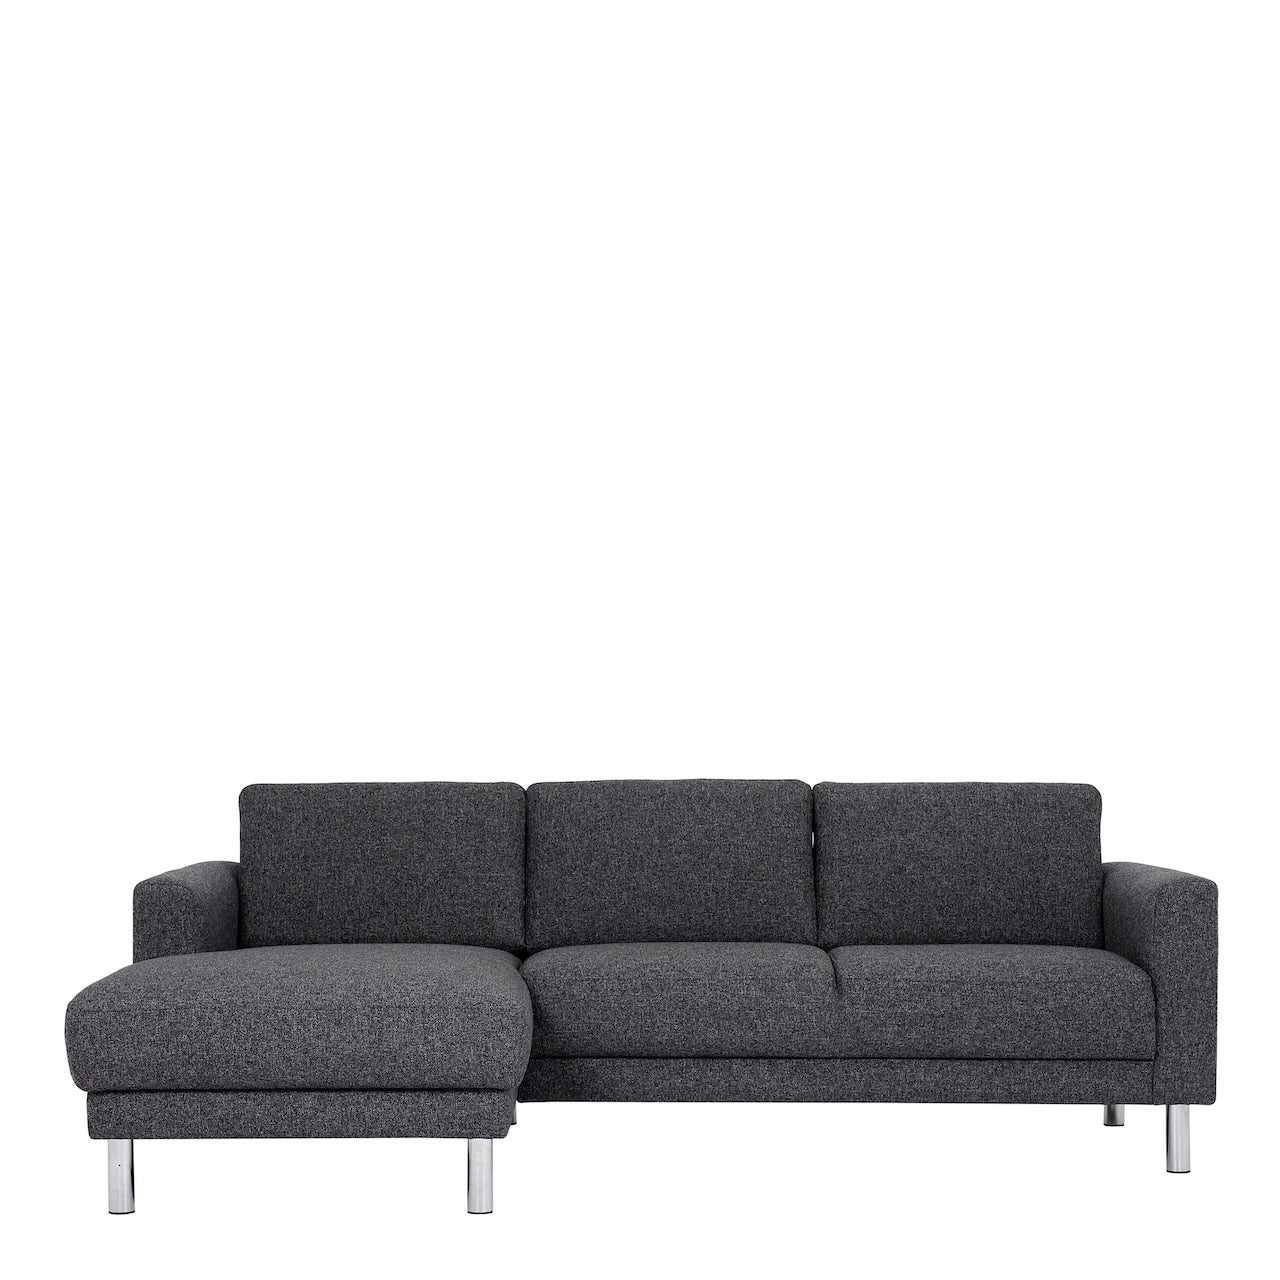 Furniture To Go Cleveland Chaiselongue Sofa (LH) in Nova Anthracite